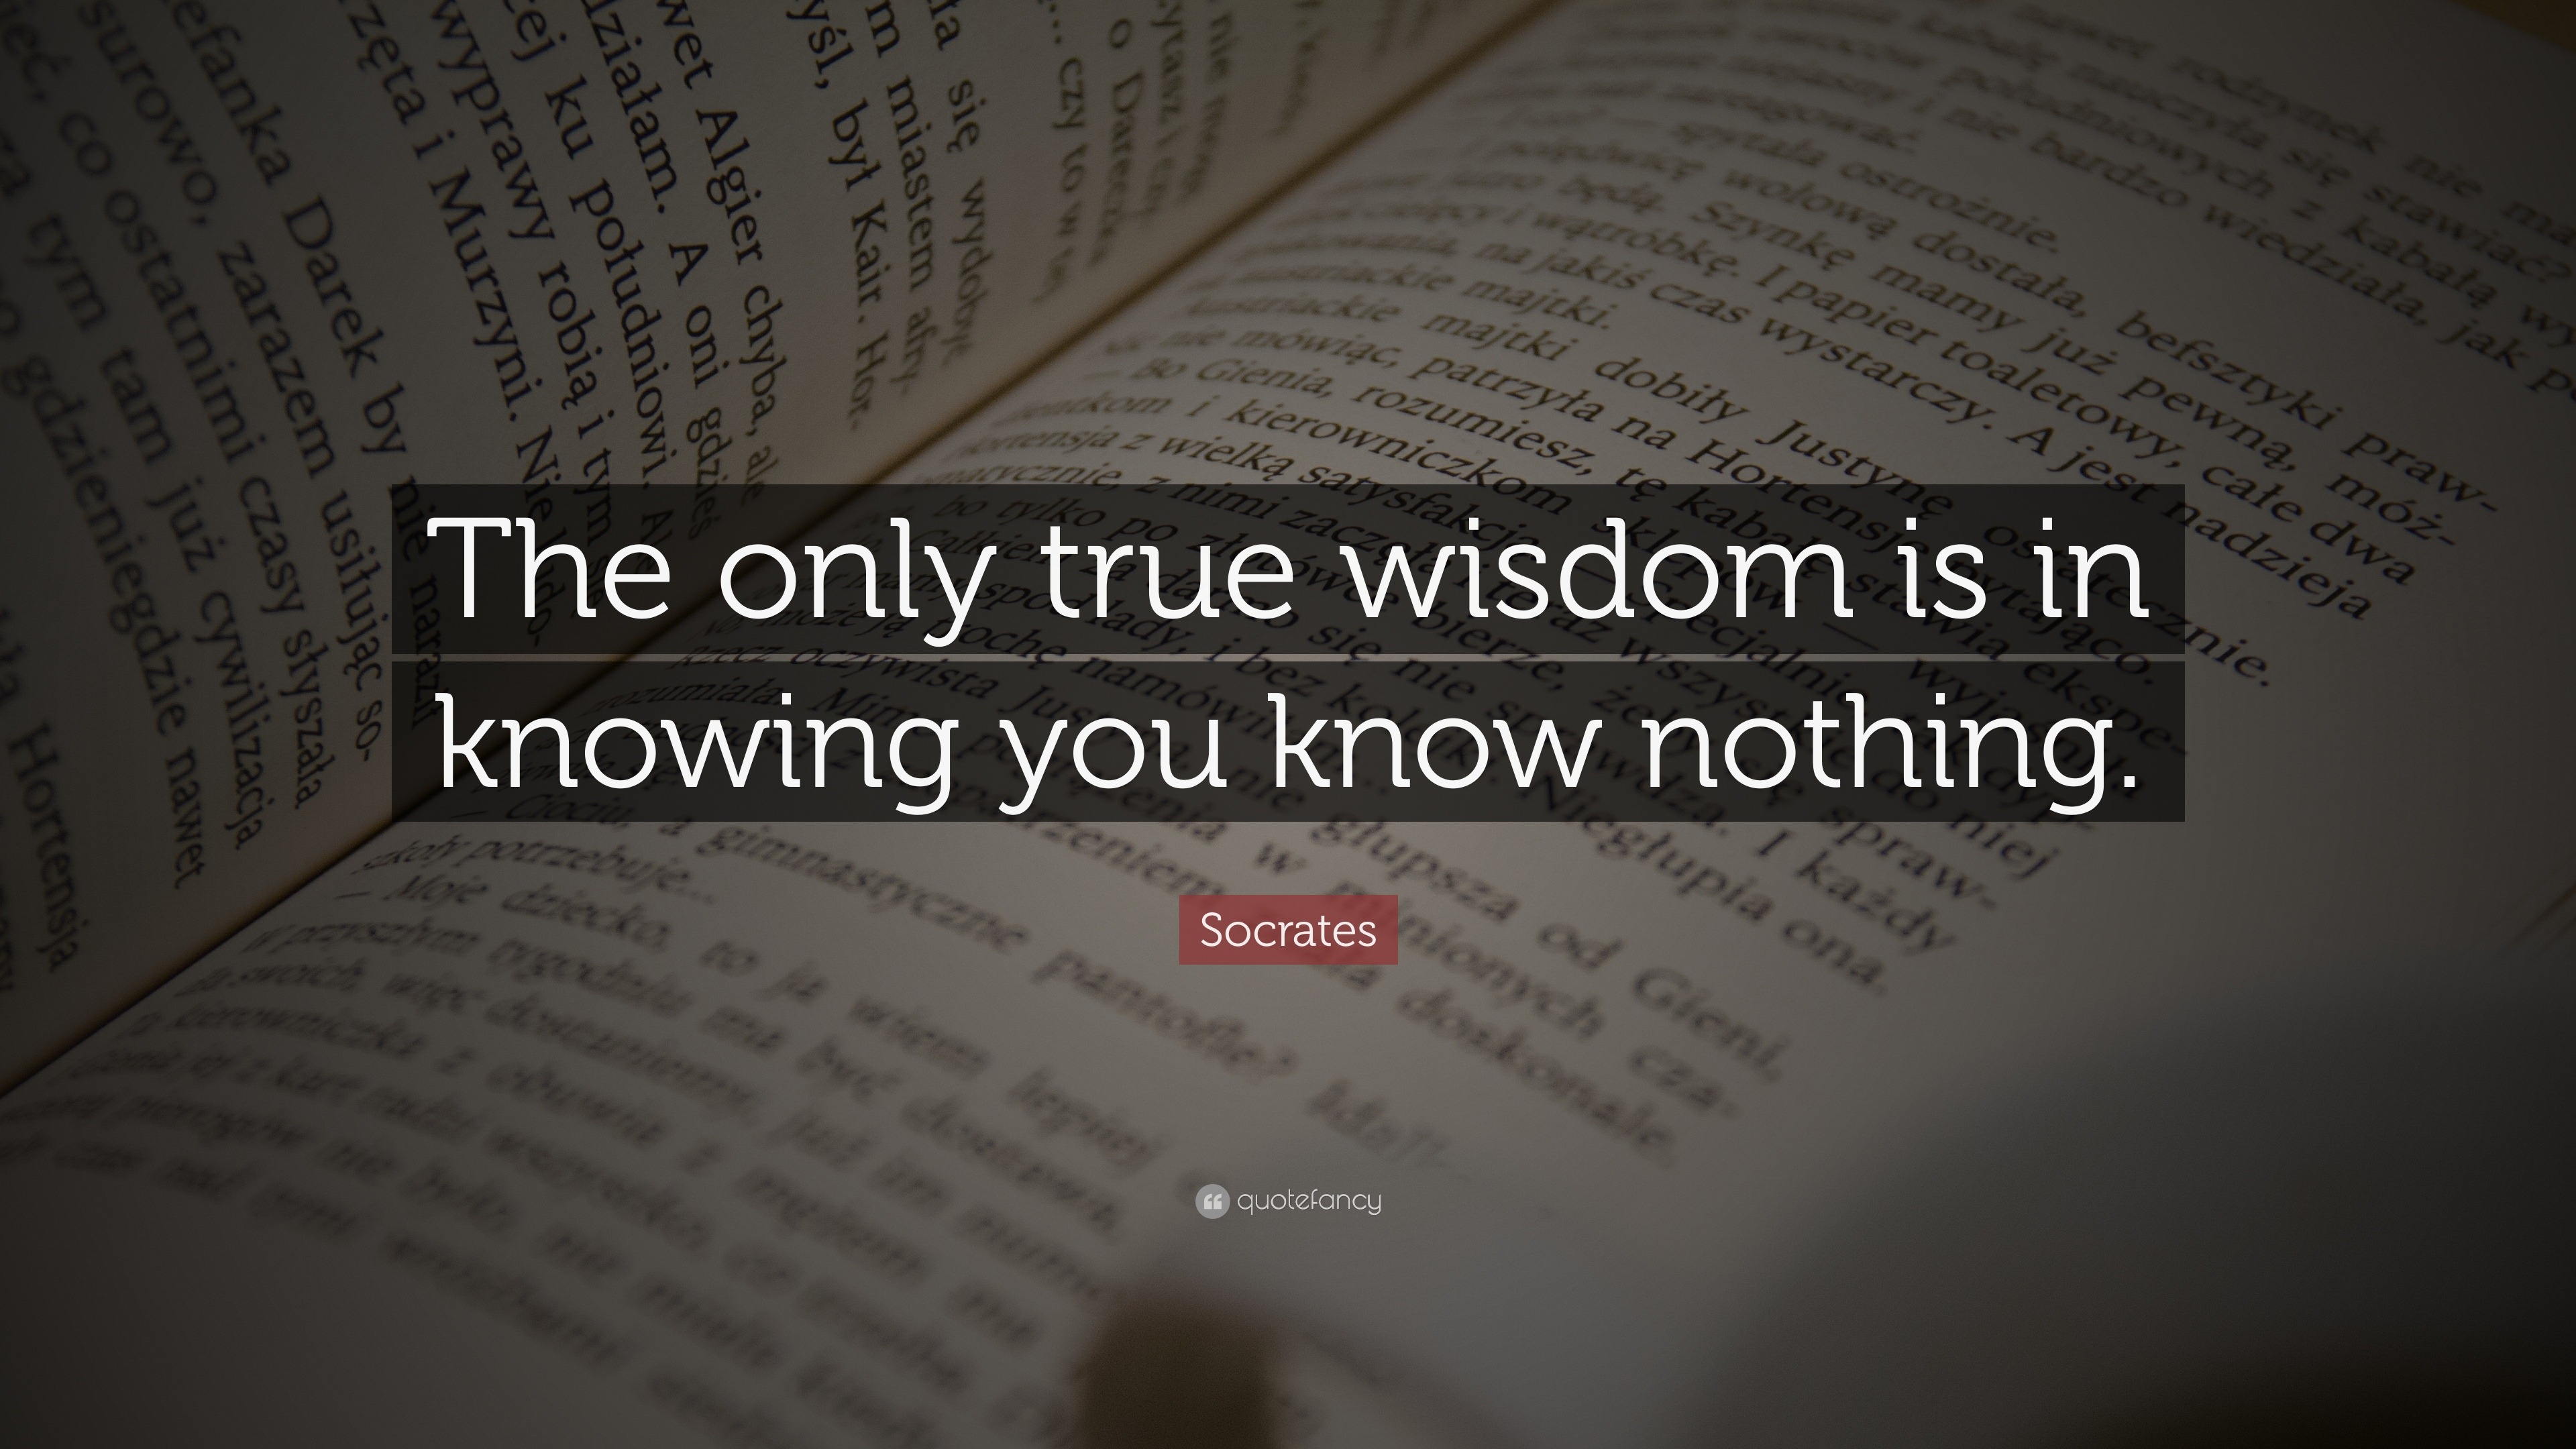 Socrates Quote: “The only true wisdom is in knowing you know nothing